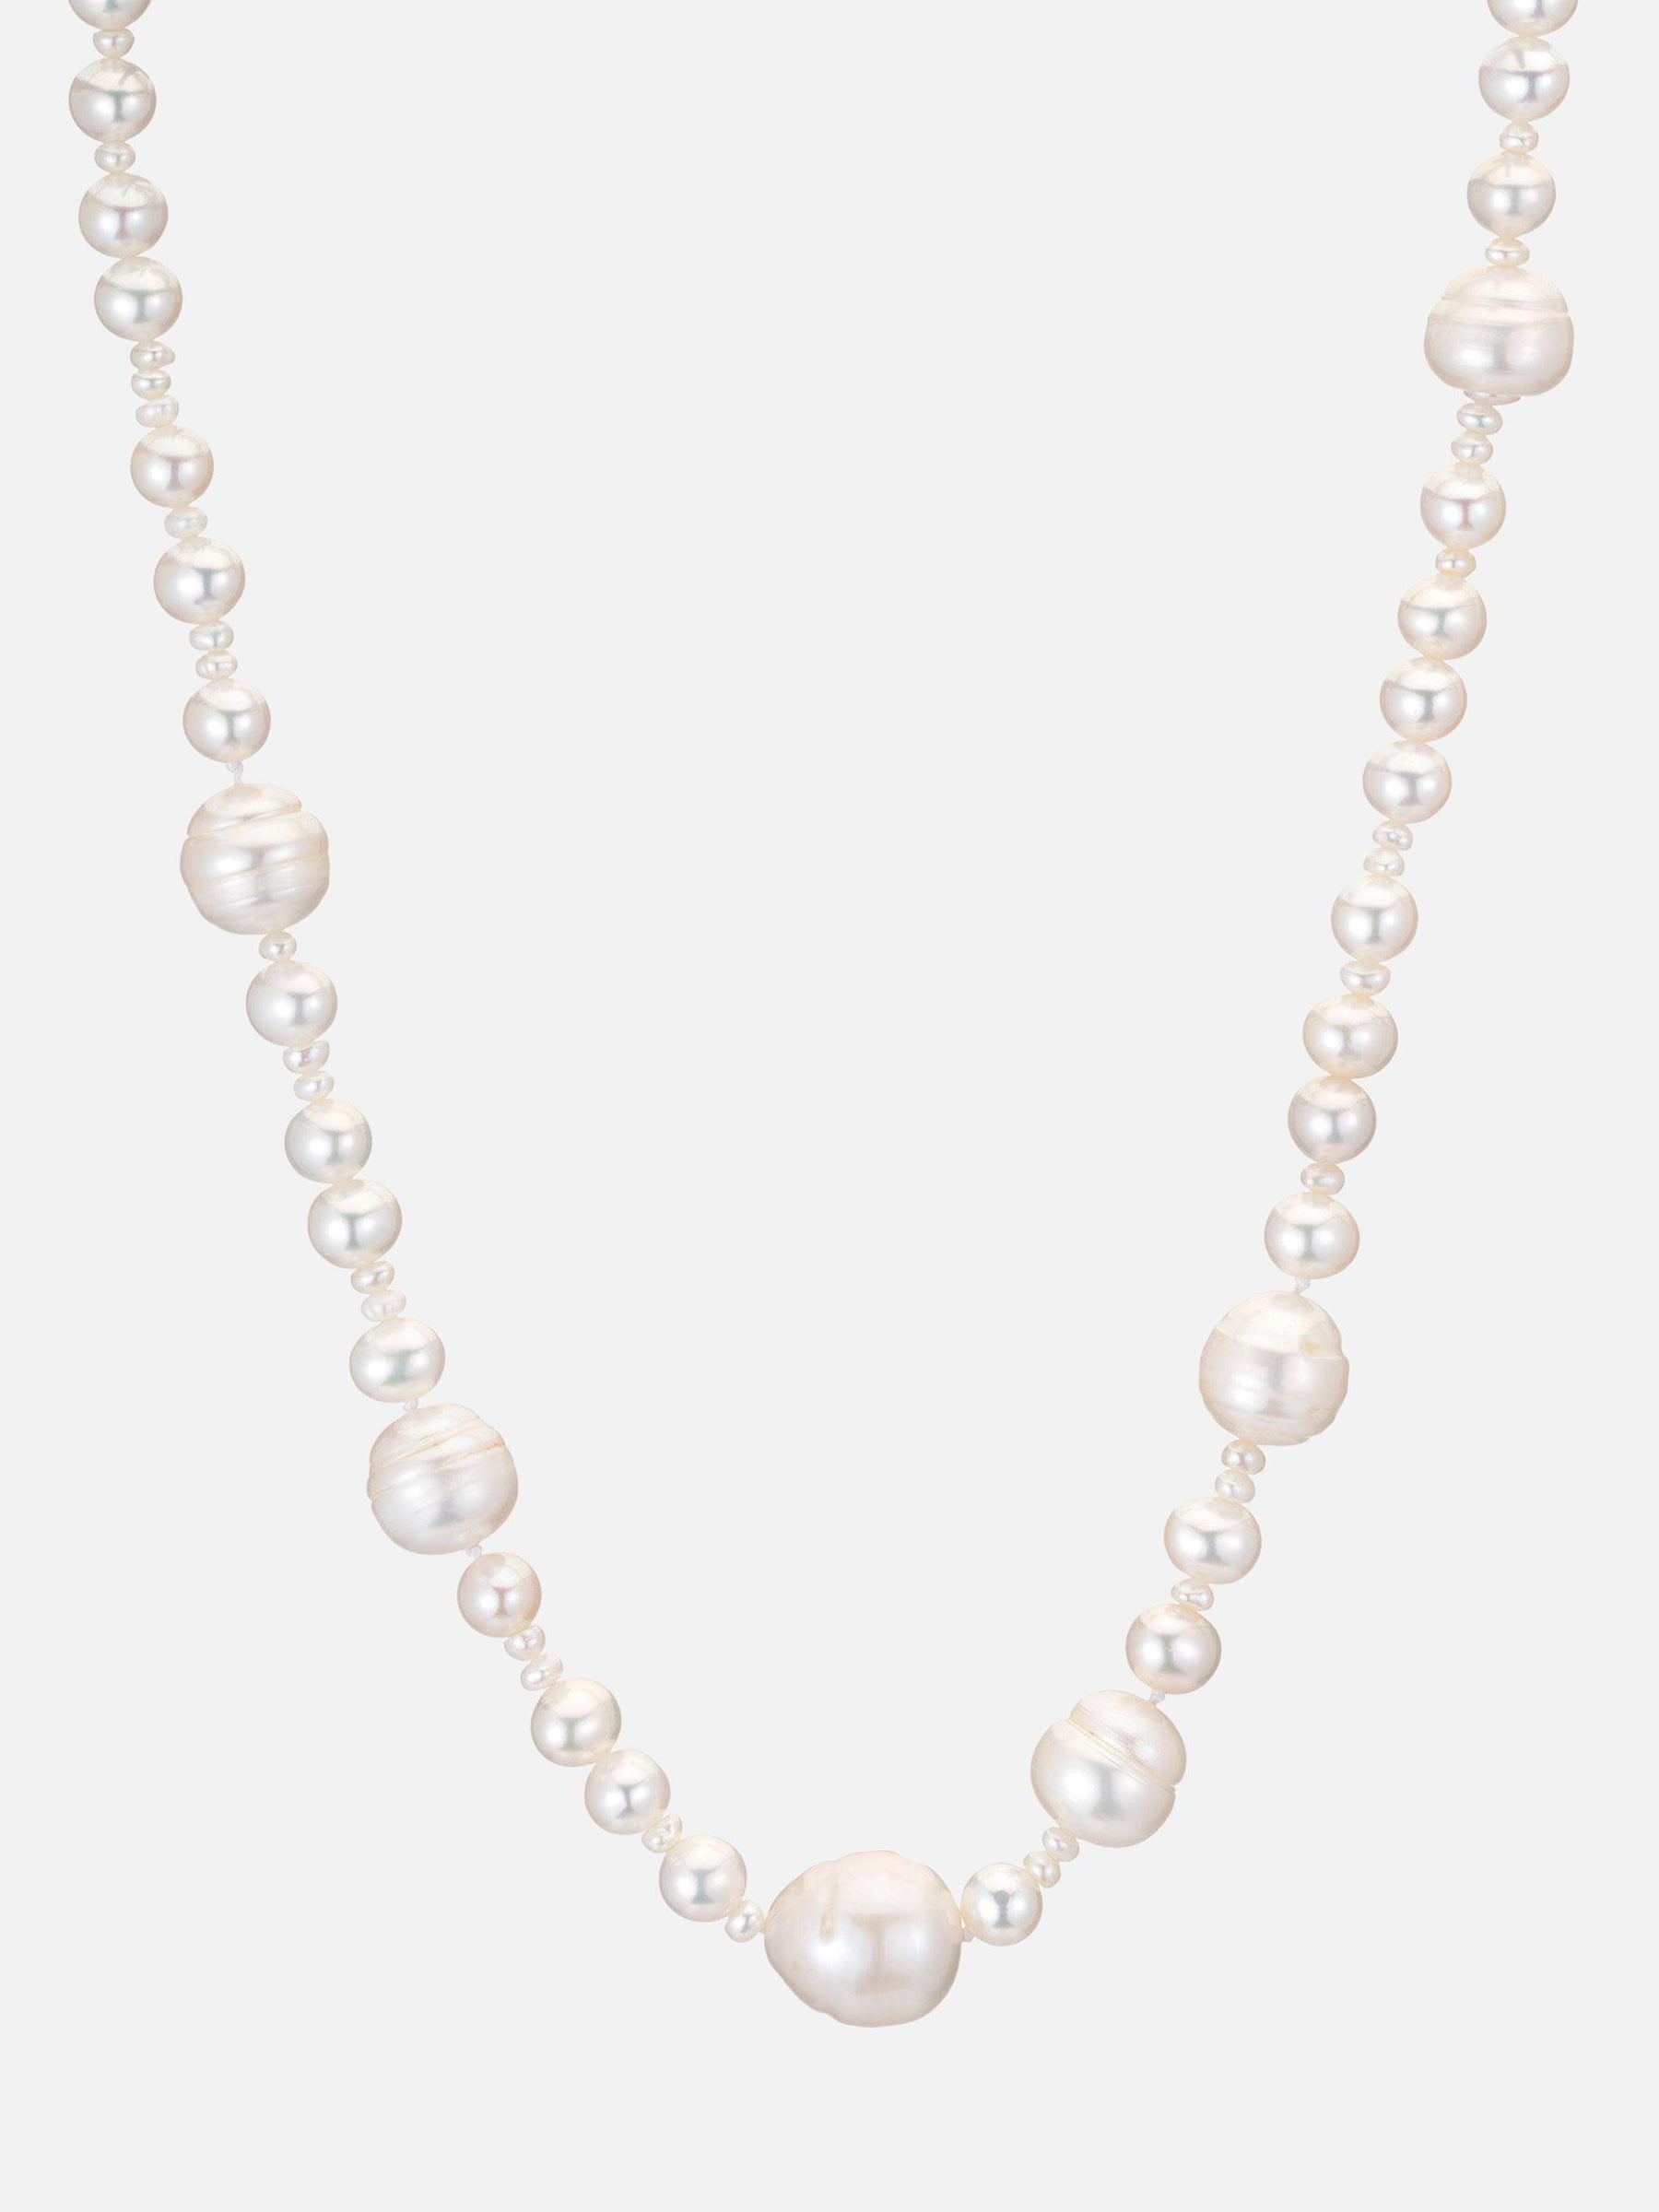 Pearl Sundry Necklace - Ariel Gordon Jewelry - At Present